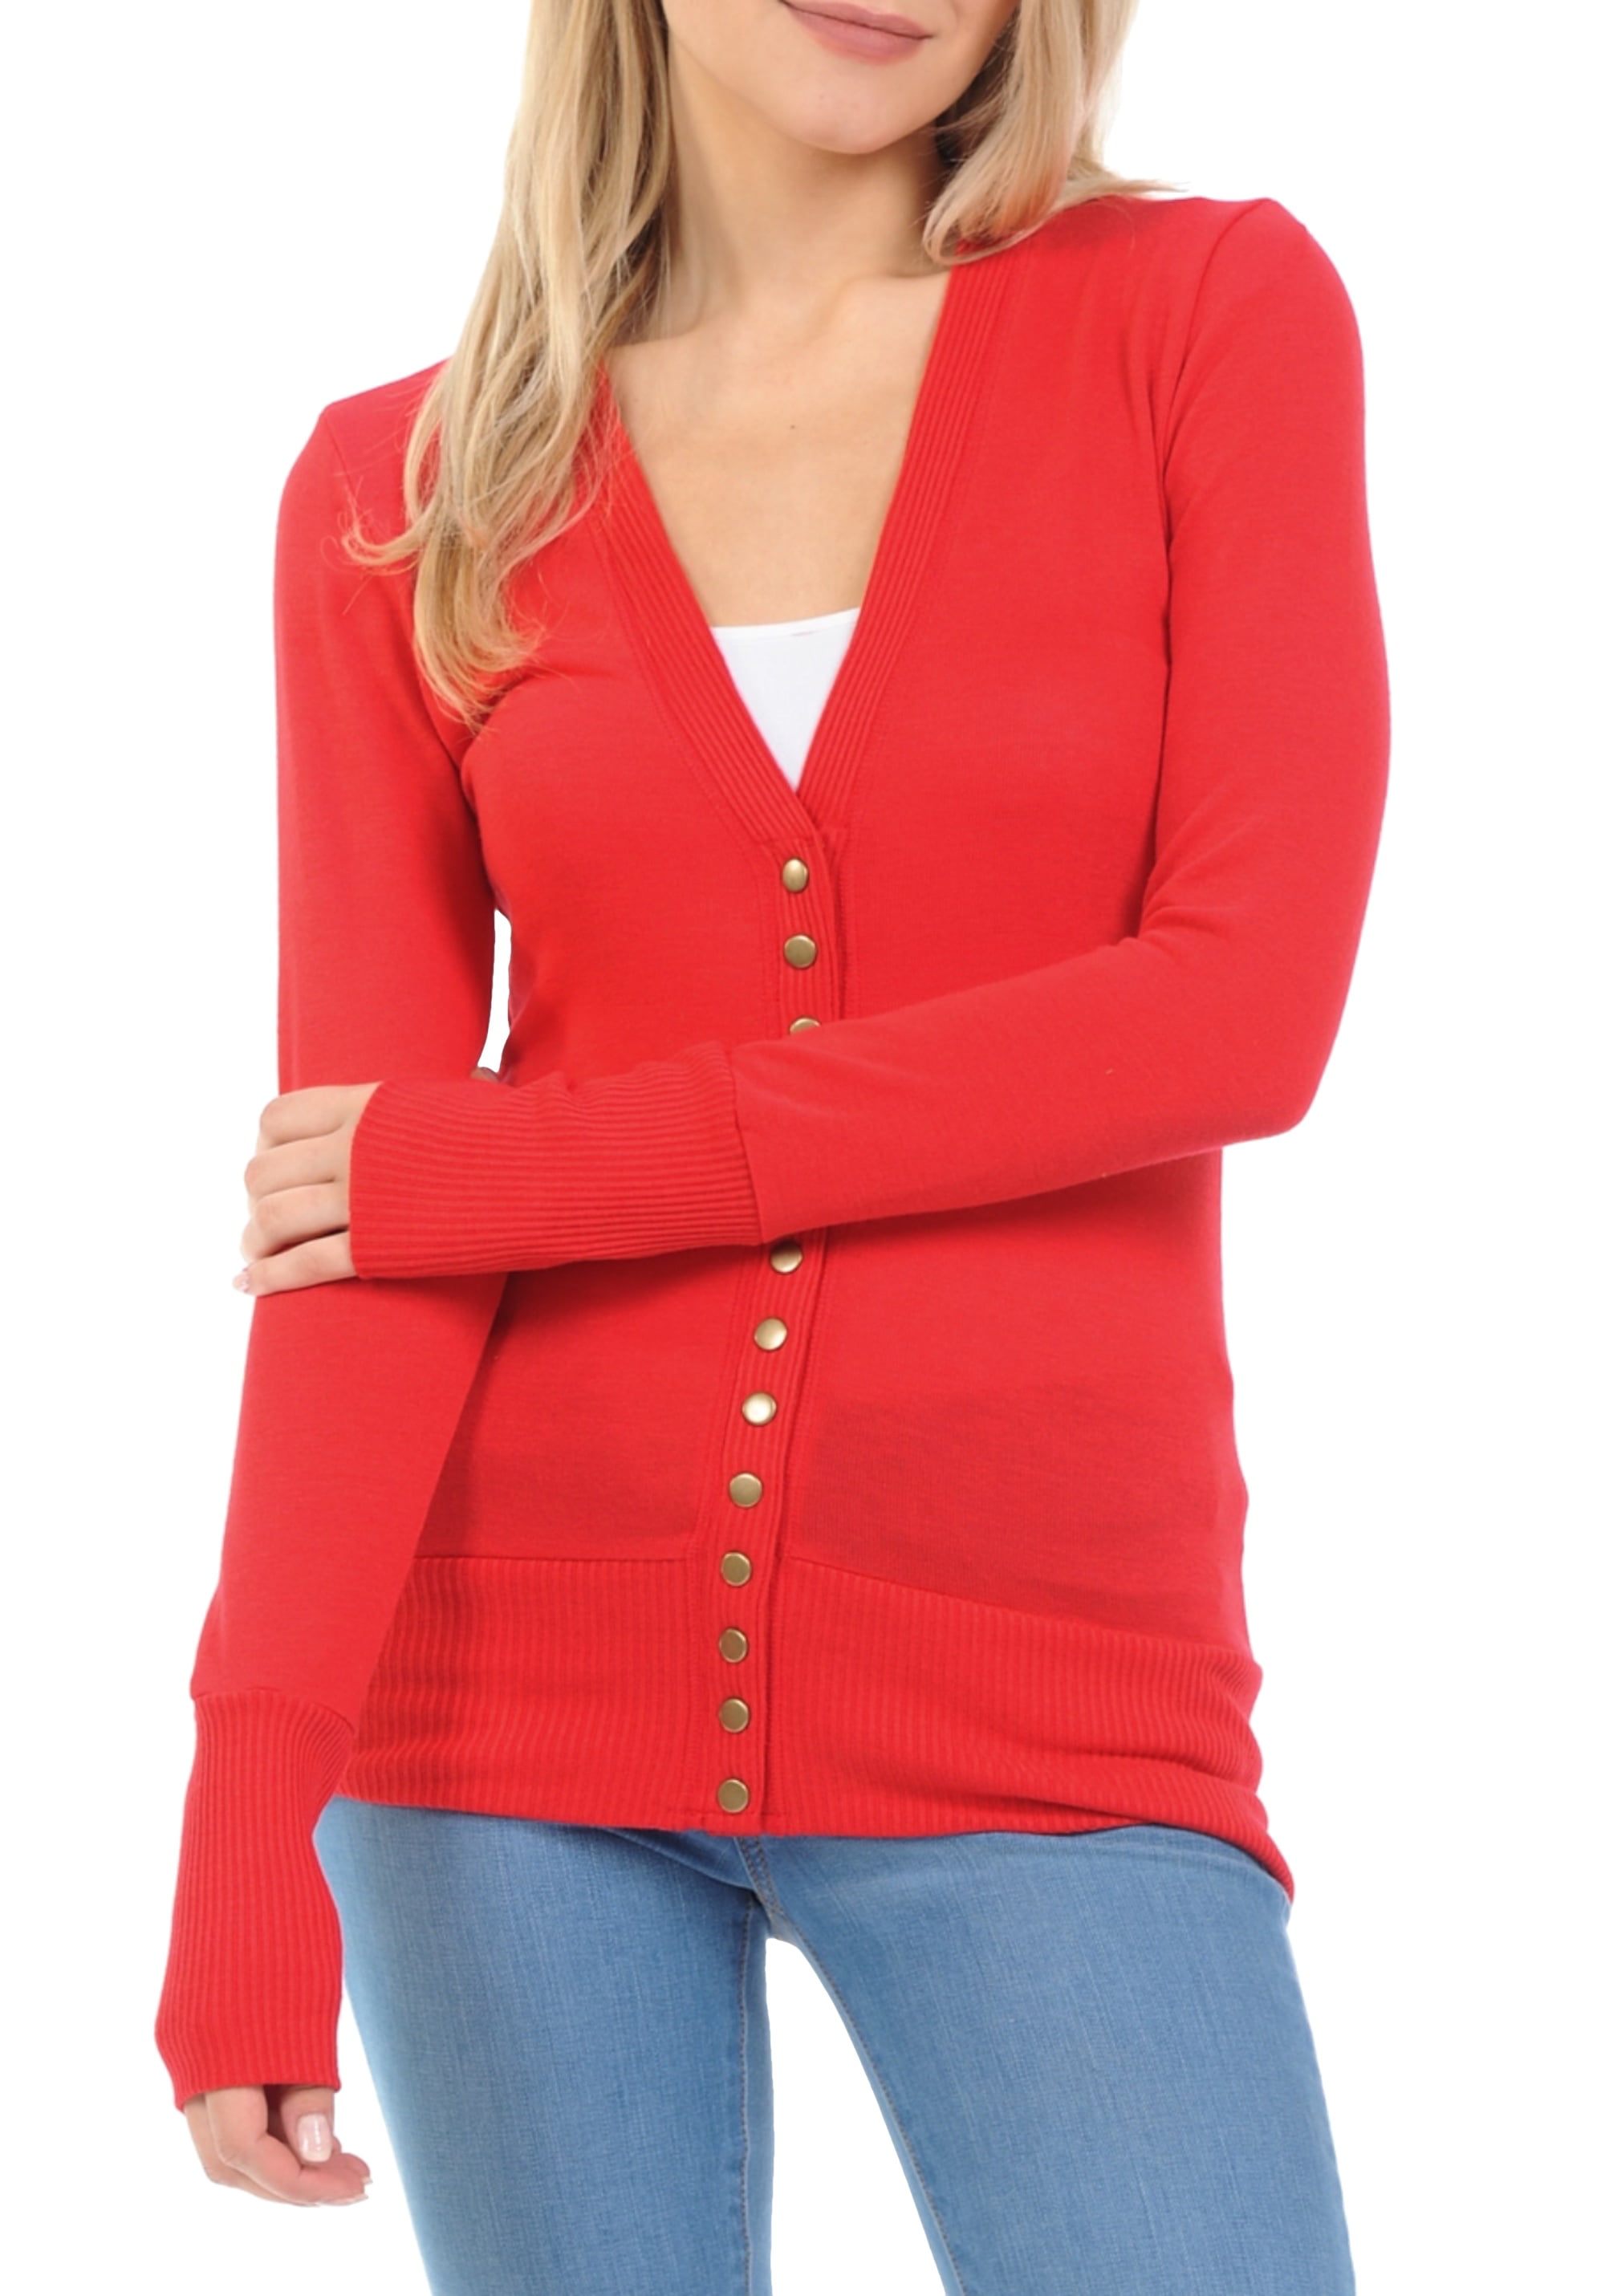 clothingave-women-s-long-sleeve-snap-button-sweater-cardigan-w-ribbed